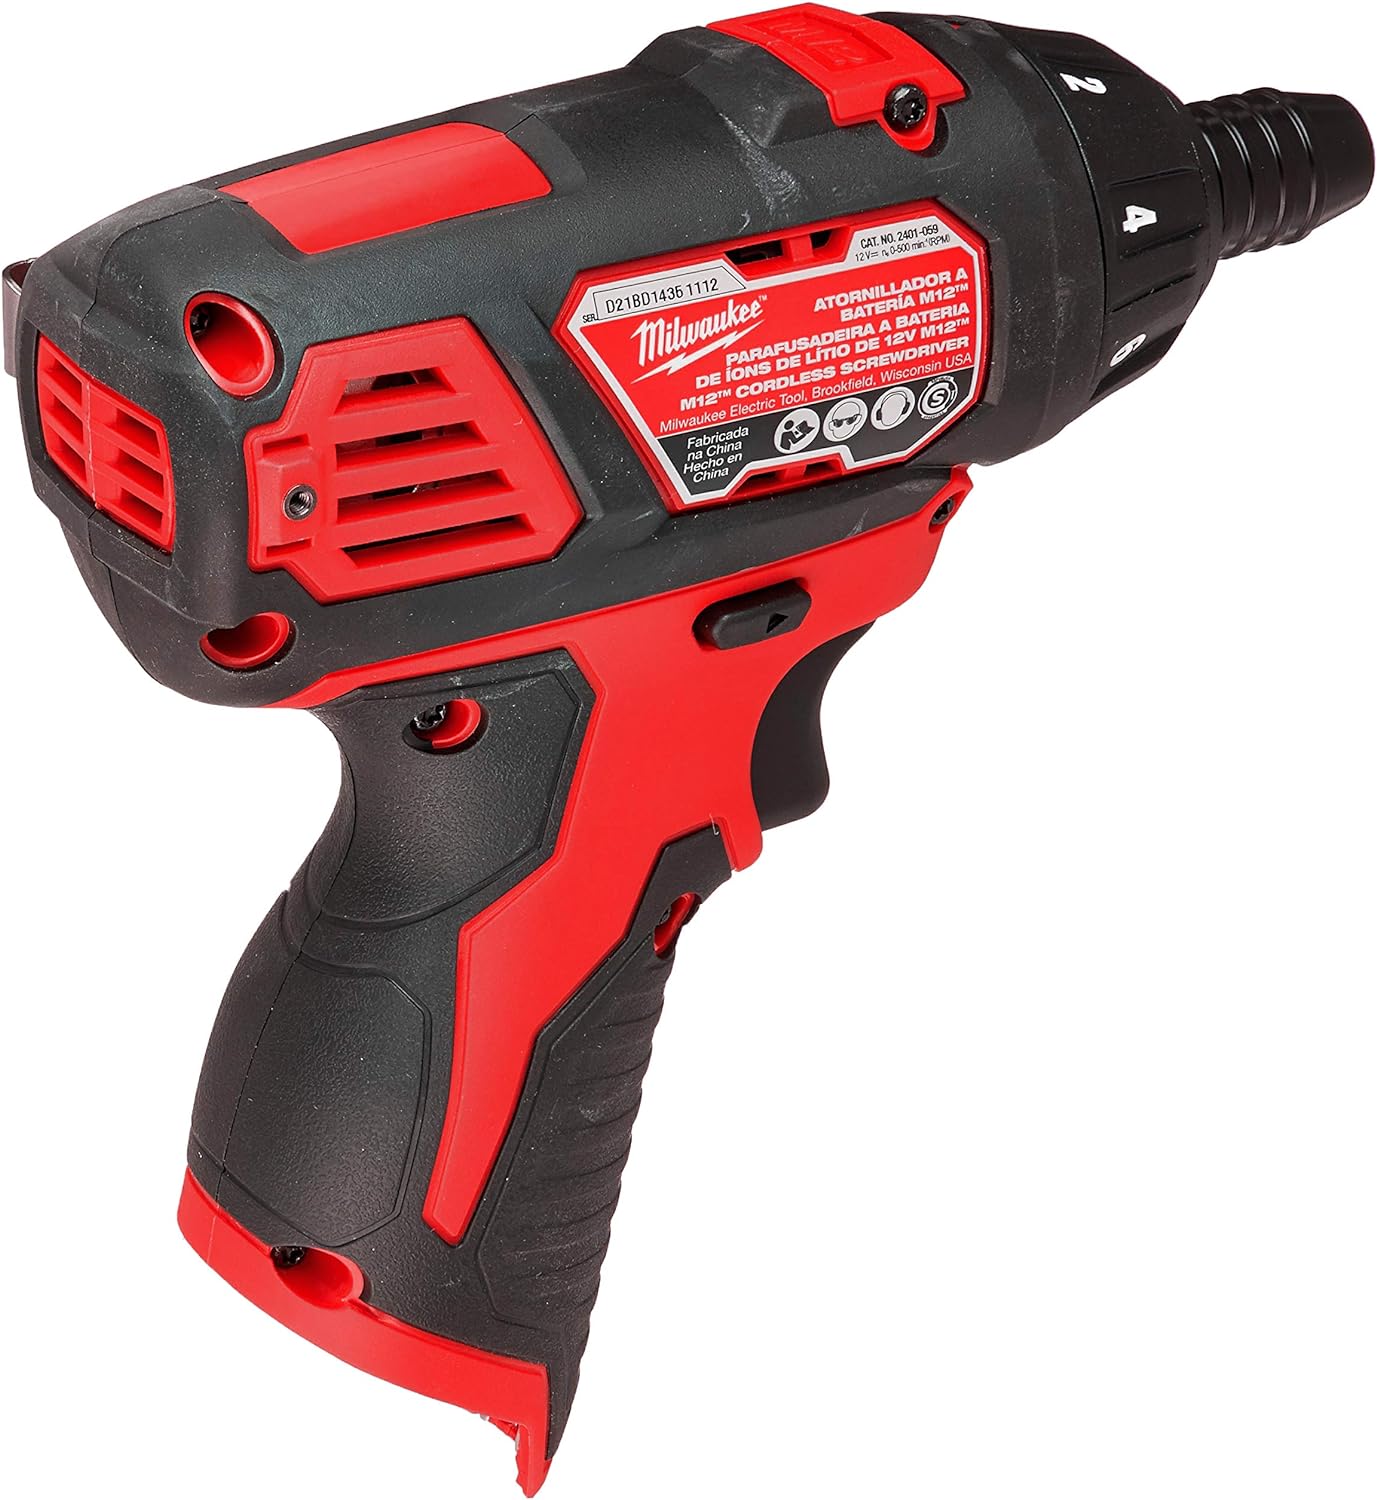 Milwaukee 2401-20 M12 12-Volt Lithium-Ion Cordless 1/4 in. Hex Screwdriver (Tool-Only)